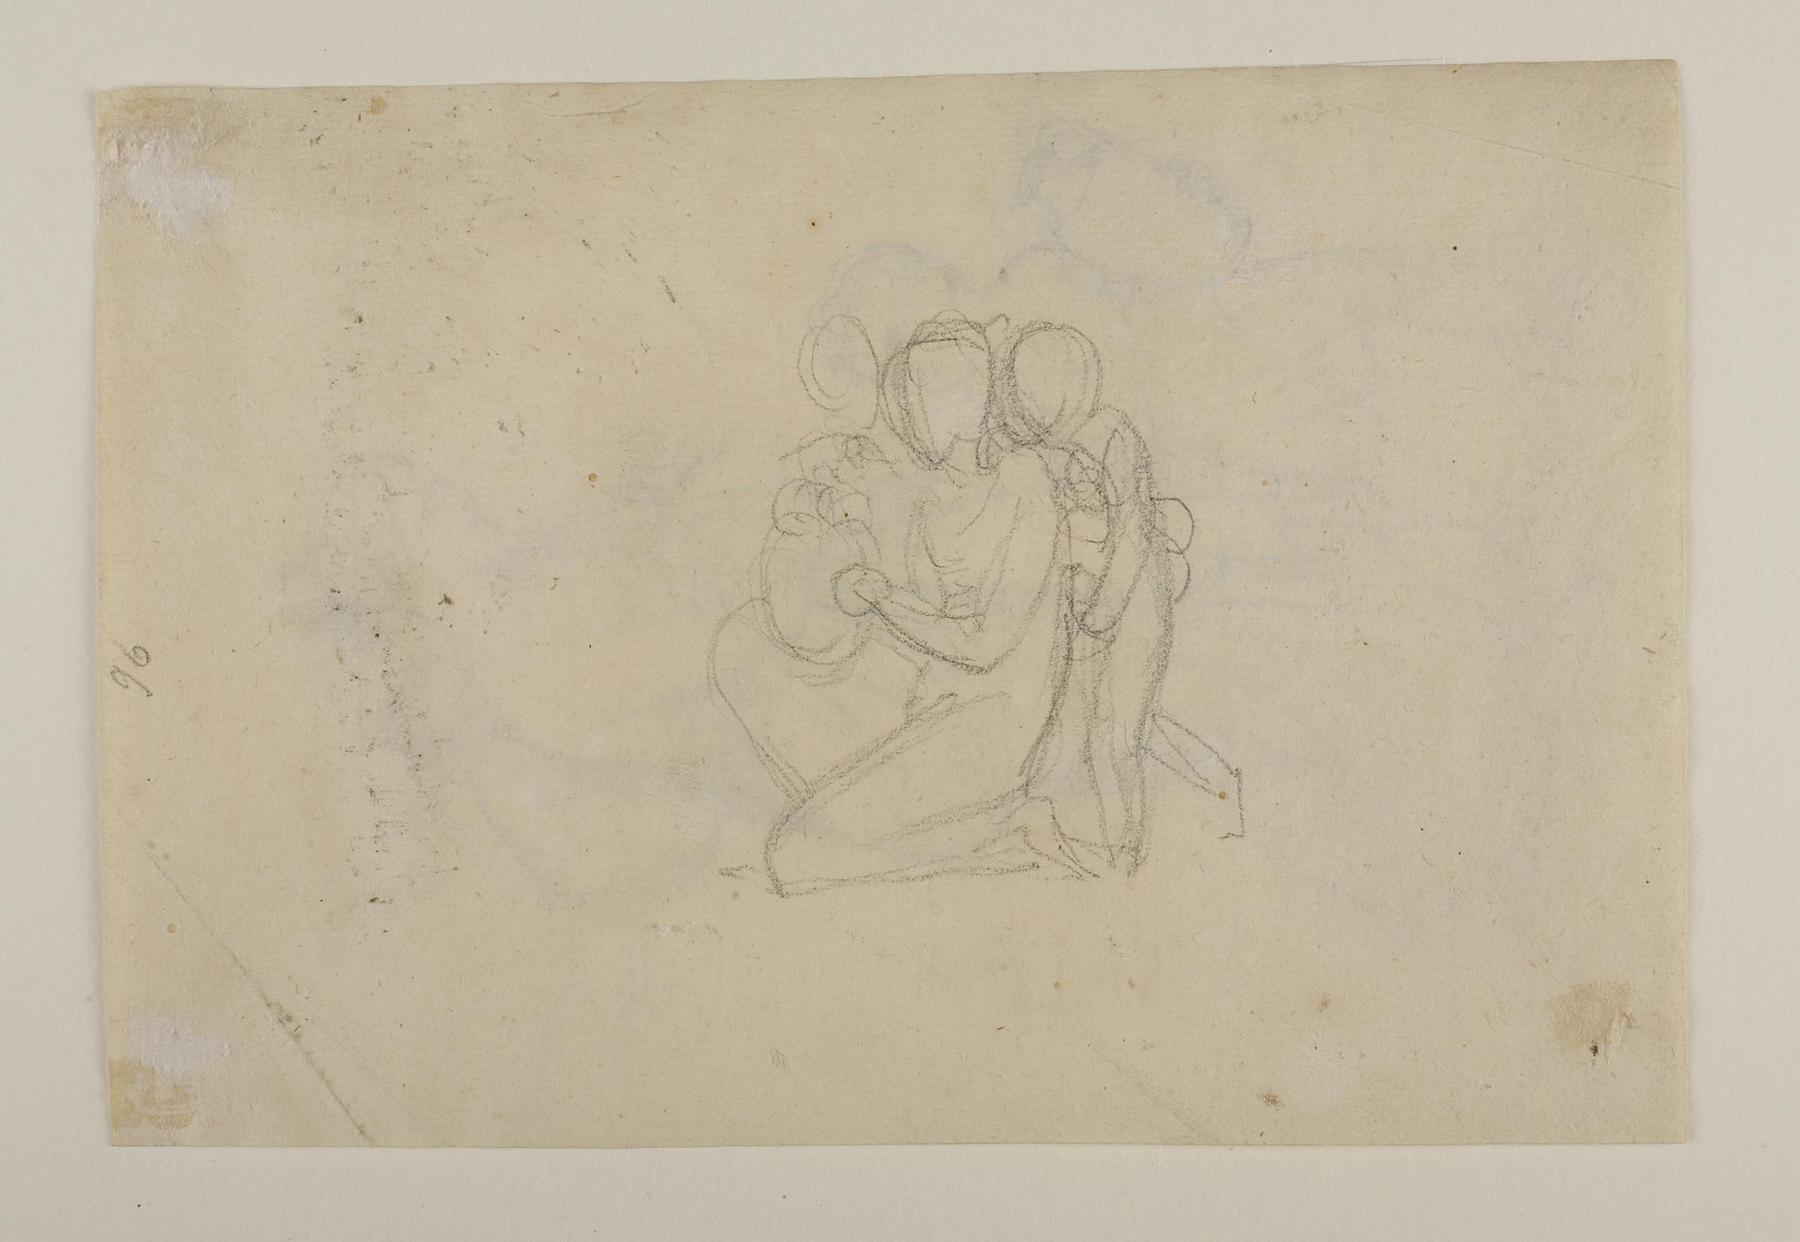 Woman weaving a garland (sketch for the Church of Our Lady?), C96v